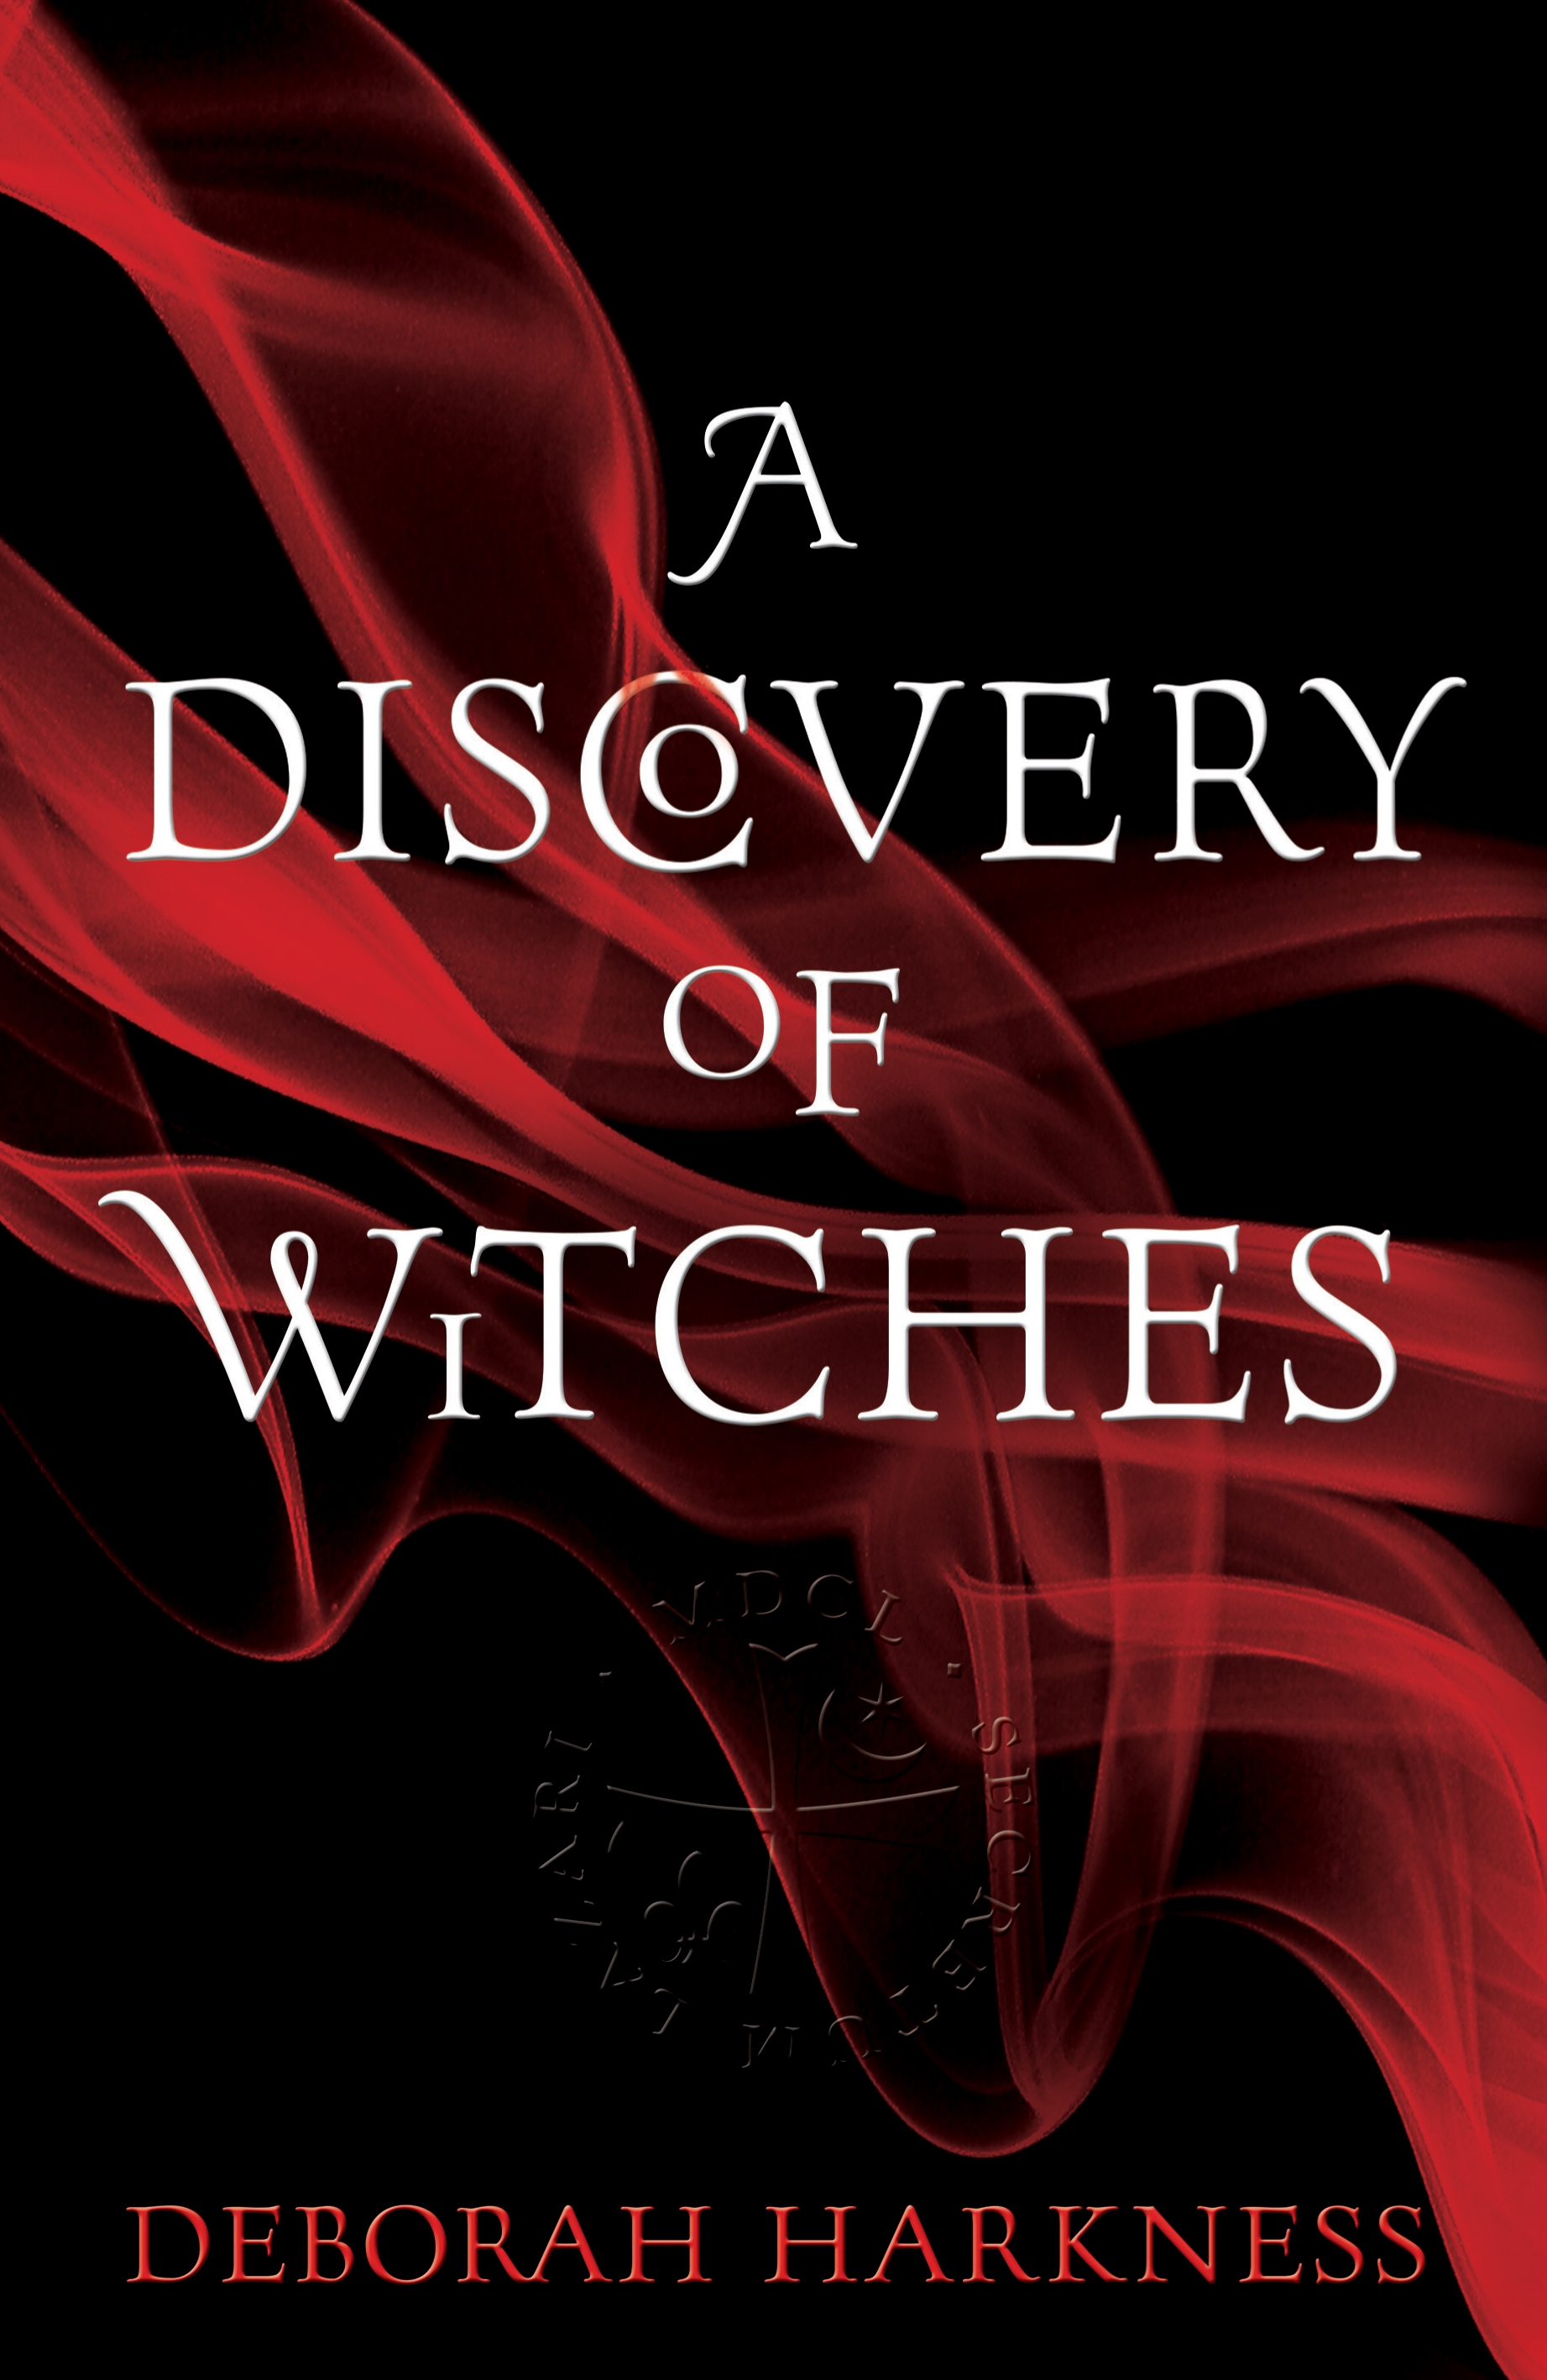 A Discovery of Witches cover.